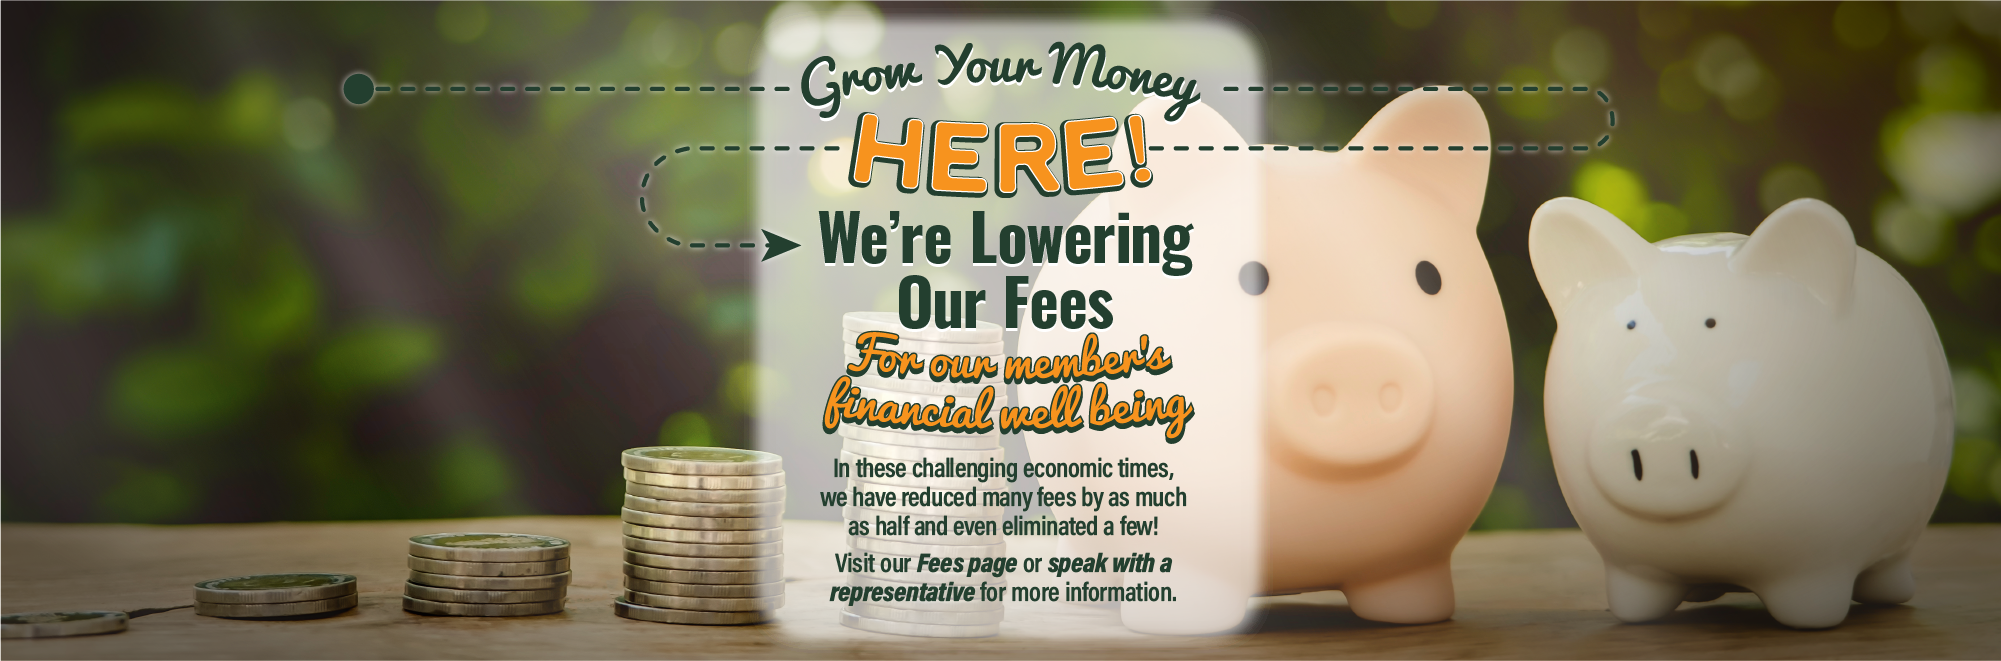 Grow Your Money Here! We’re Lowering Our Fees. In these challenging economic times, we have reduced many fees by as much as half and even eliminated a few! Visit our Fees page or speak with a representative for more information.